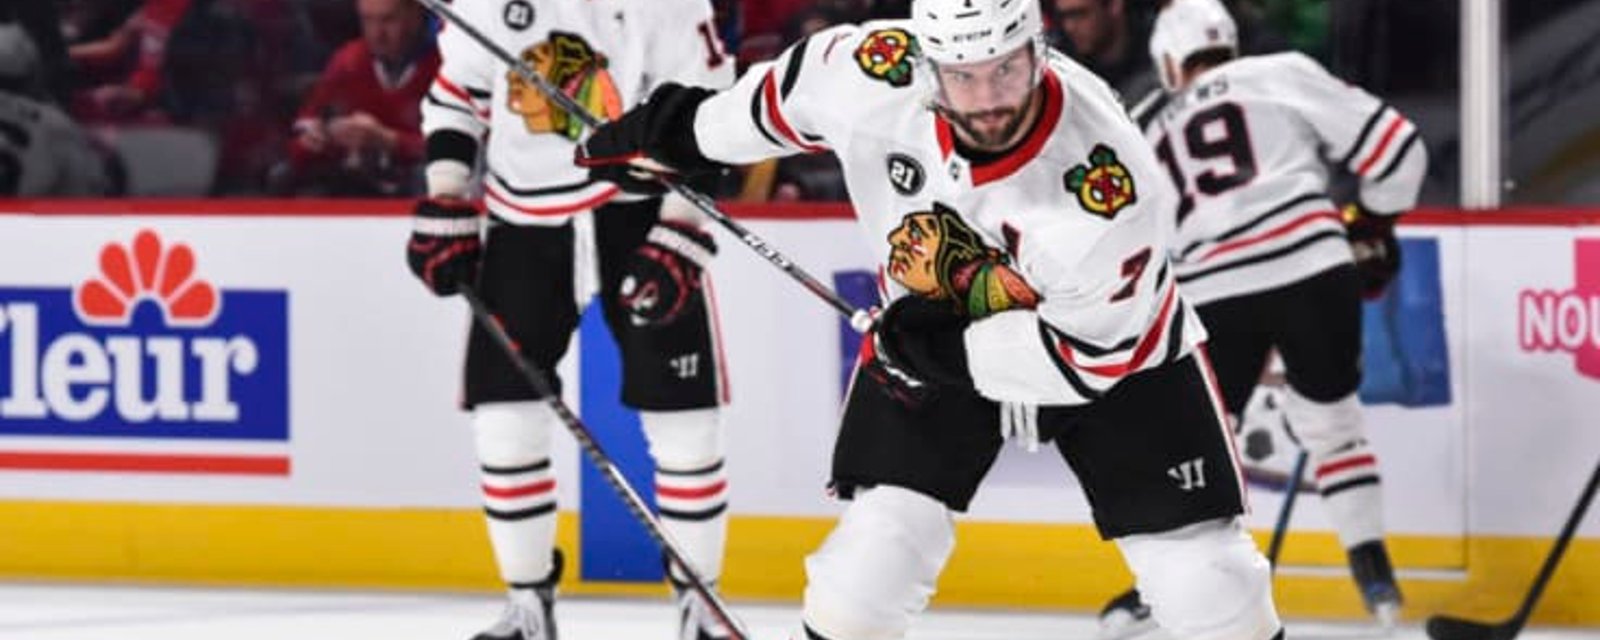 Blackhawks forced to make a trade due to surplus of players